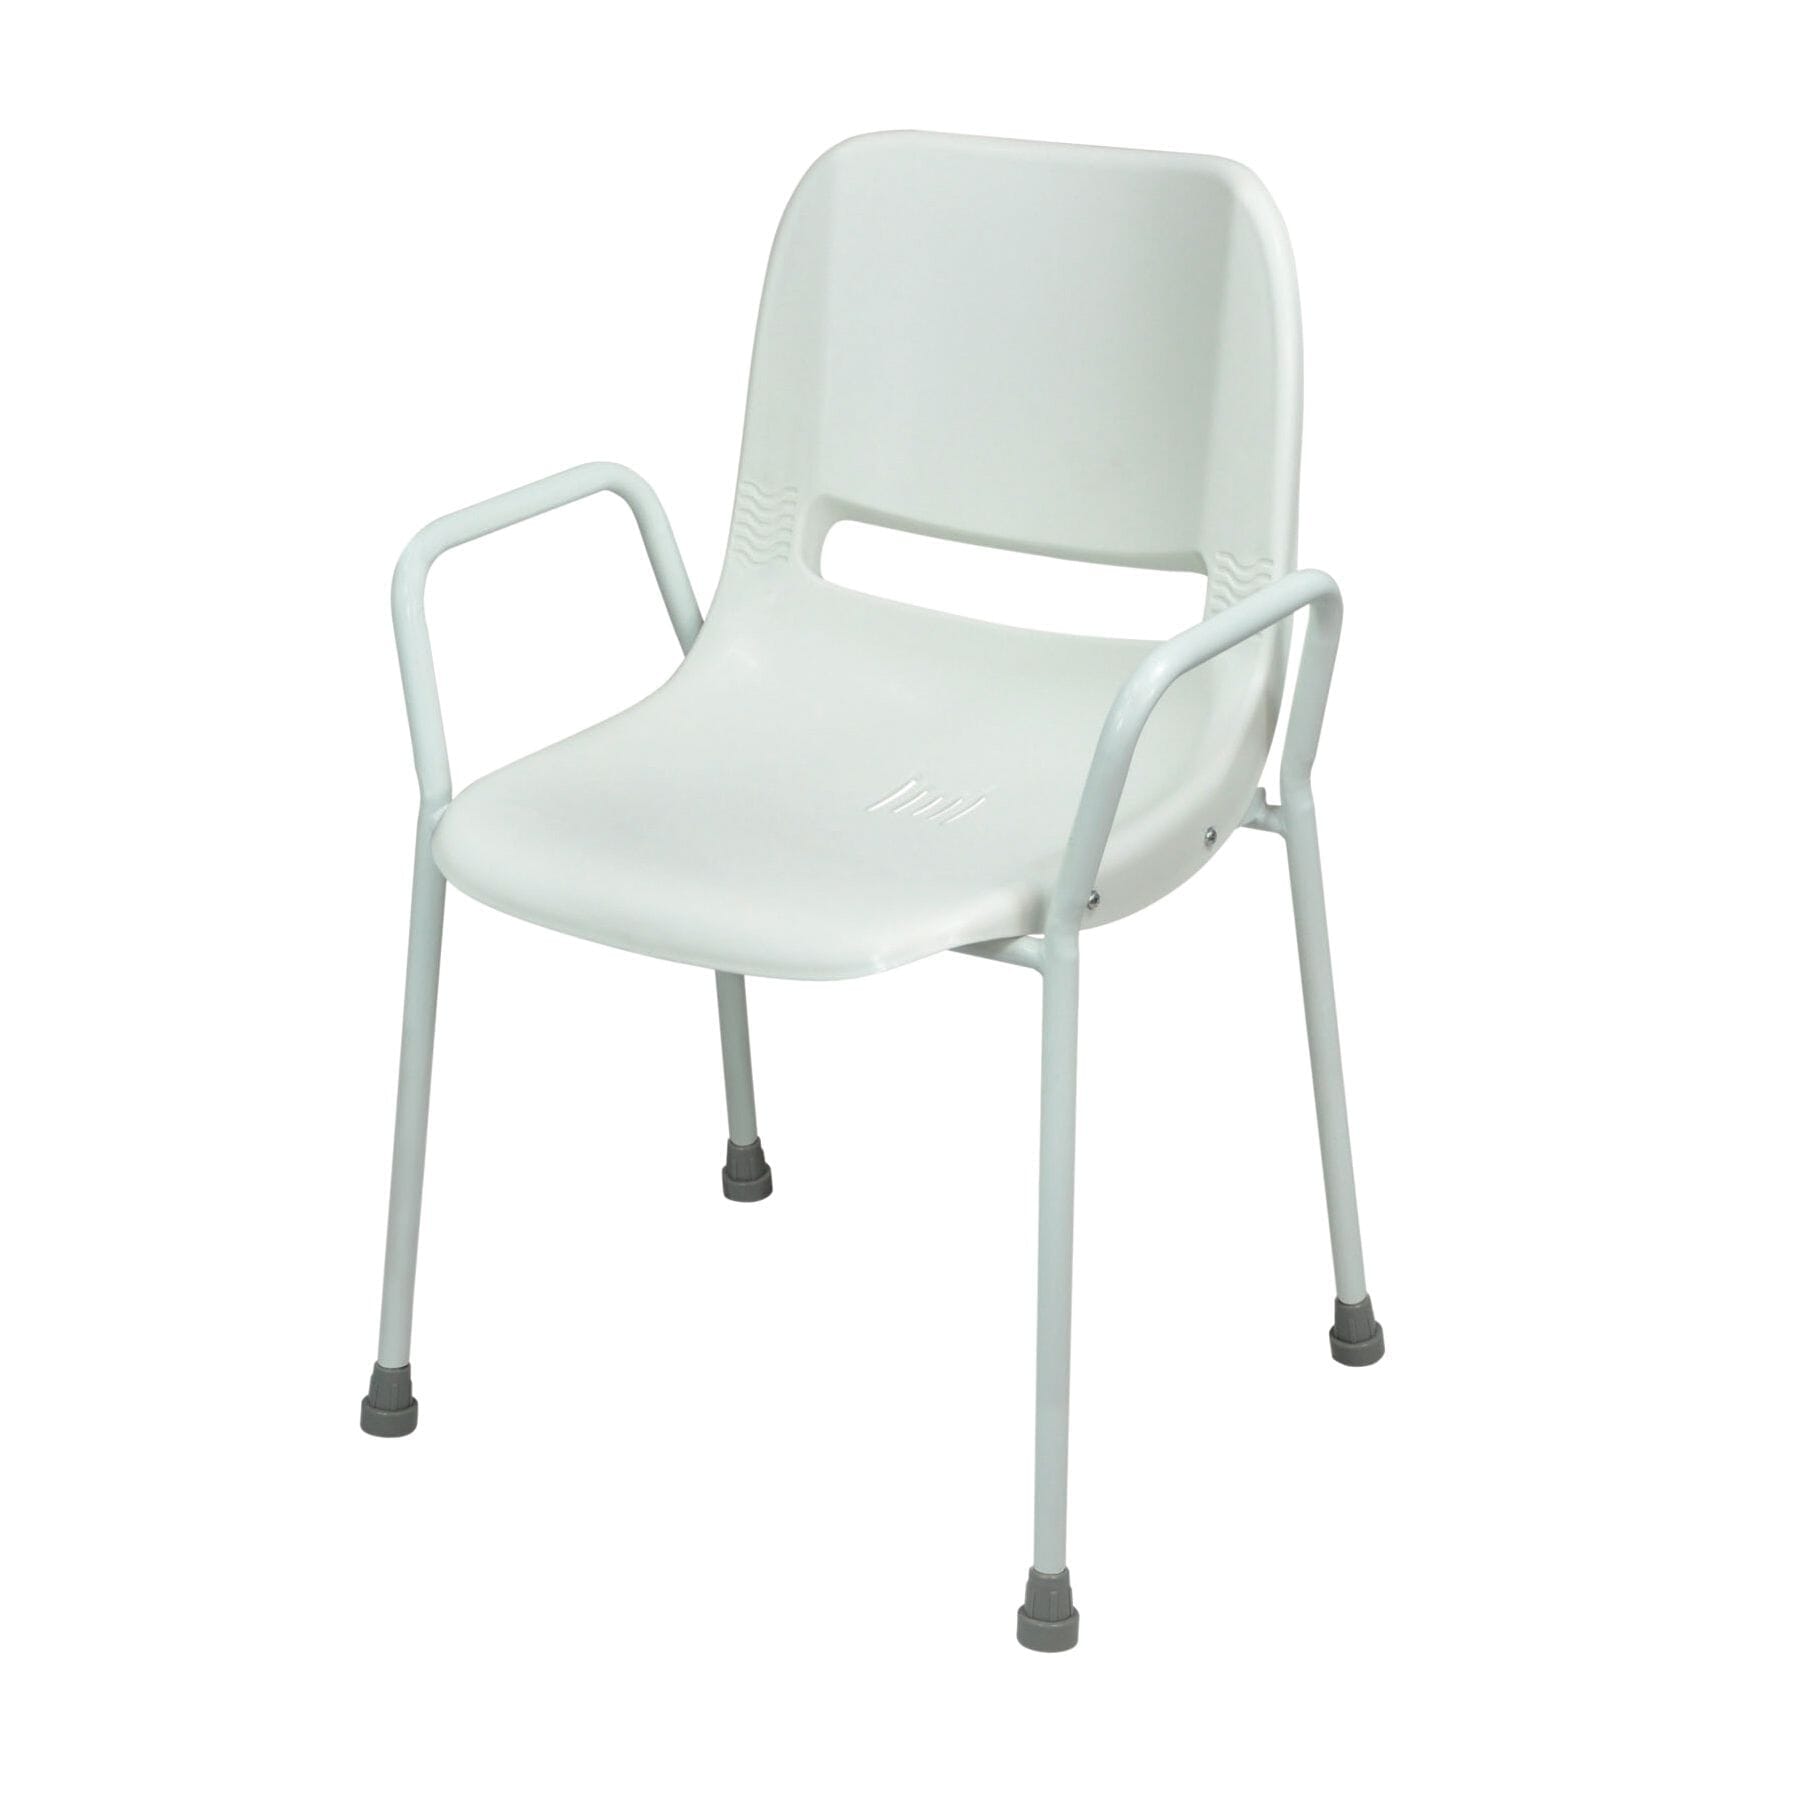 View Milton Stackable Portable Shower Chair Fixed Height White information